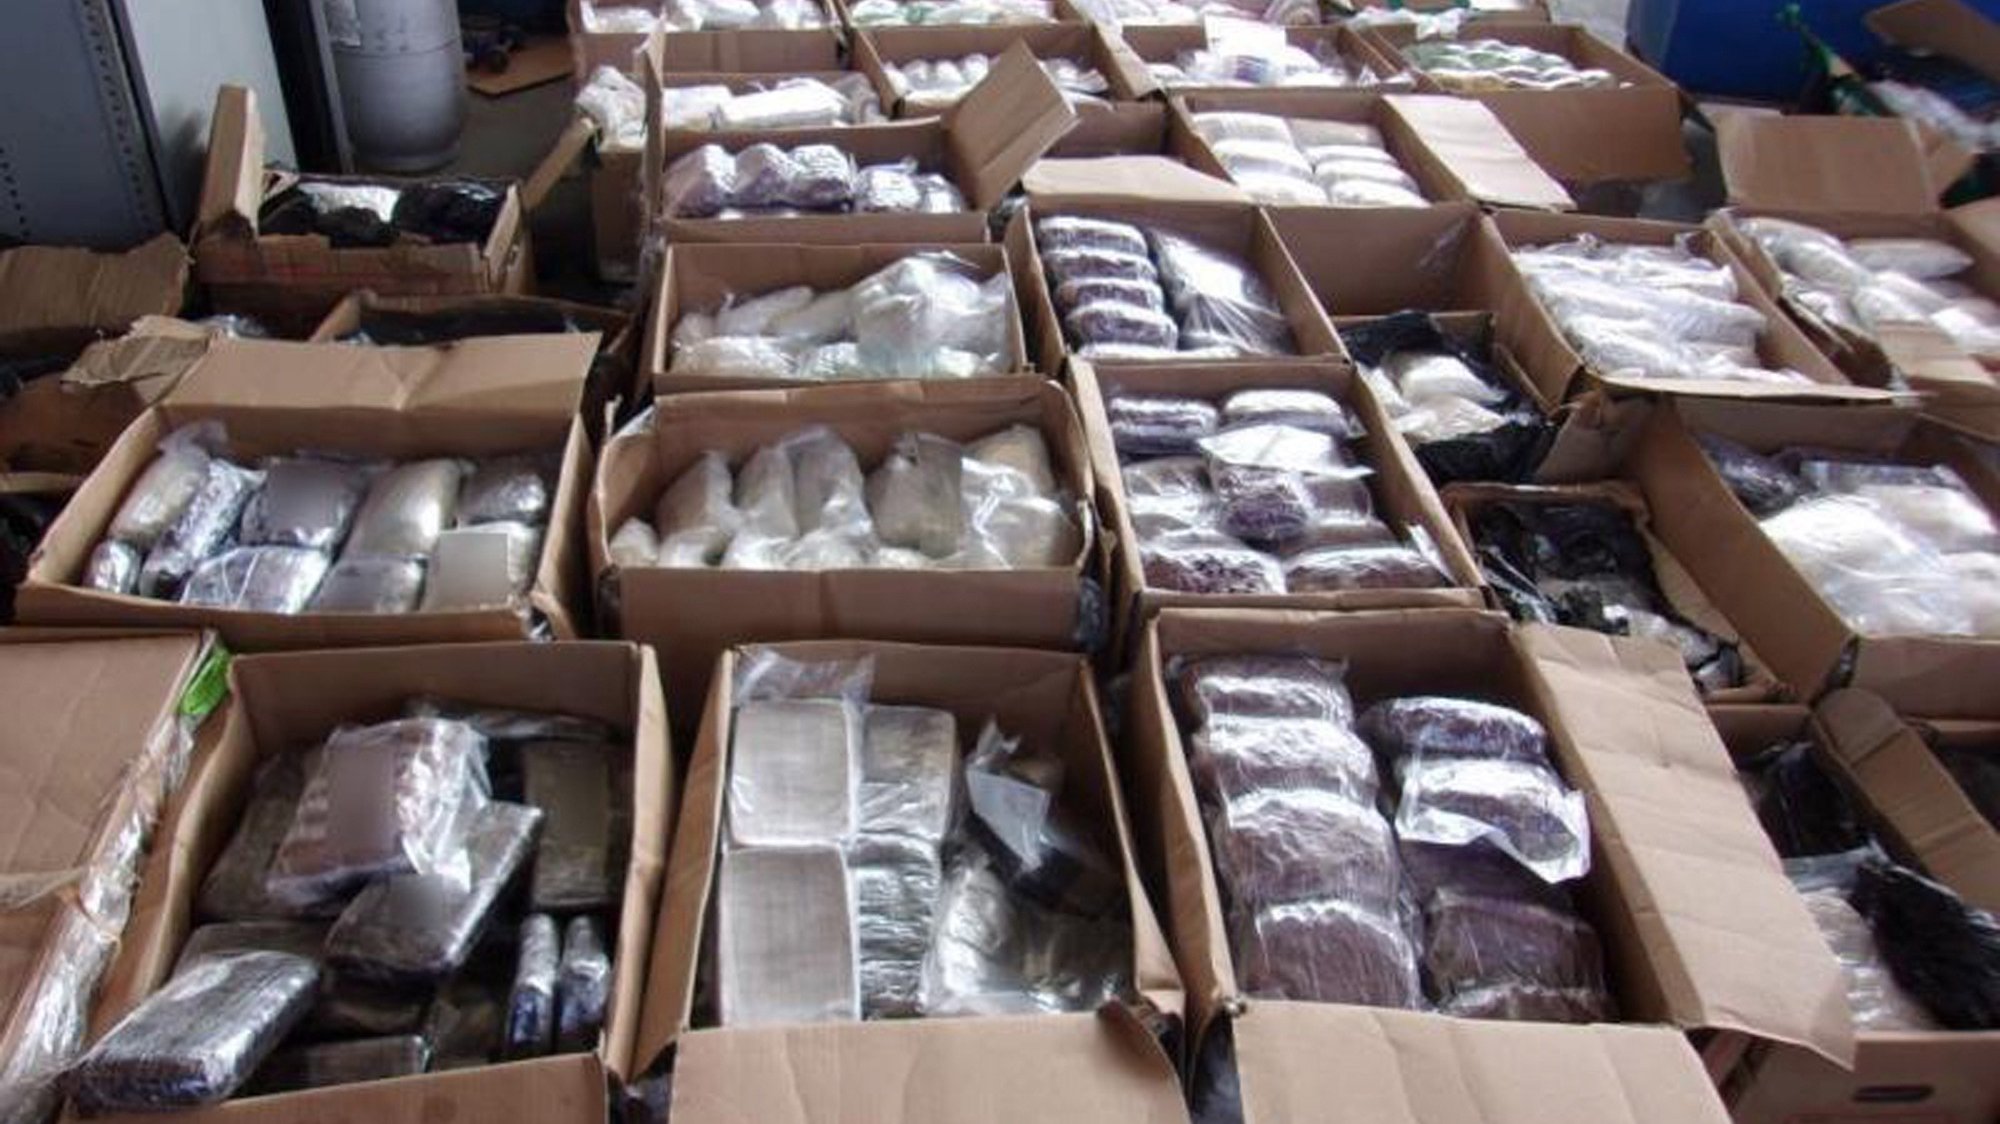 epa08737004 A handout photo made available by the US Customs and Border Protection agency shows illegal narcotics seized by law enforcement agents at the Otay Mesa Port of Entry in San Diego, California, USA, 09 October 2020 (issued 12 October 2020). According to media reports, officers from US Customs and Border Protection and US Department of Homeland Security seized over 3,014 pounds of methamphetamine, as well as heroin, fentanyl powder and pills, worth an estimated 7.2 million US dollar, inside a truck also loaded with medical supplies. The operation marked the second largest methamphetamine seizure along the southwestern border of the USA in the history of the US Customs and Border Protection agency.  EPA/US CUSTOMS AND BORDER PROTECTION  HANDOUT EDITORIAL USE ONLY/NO SALES